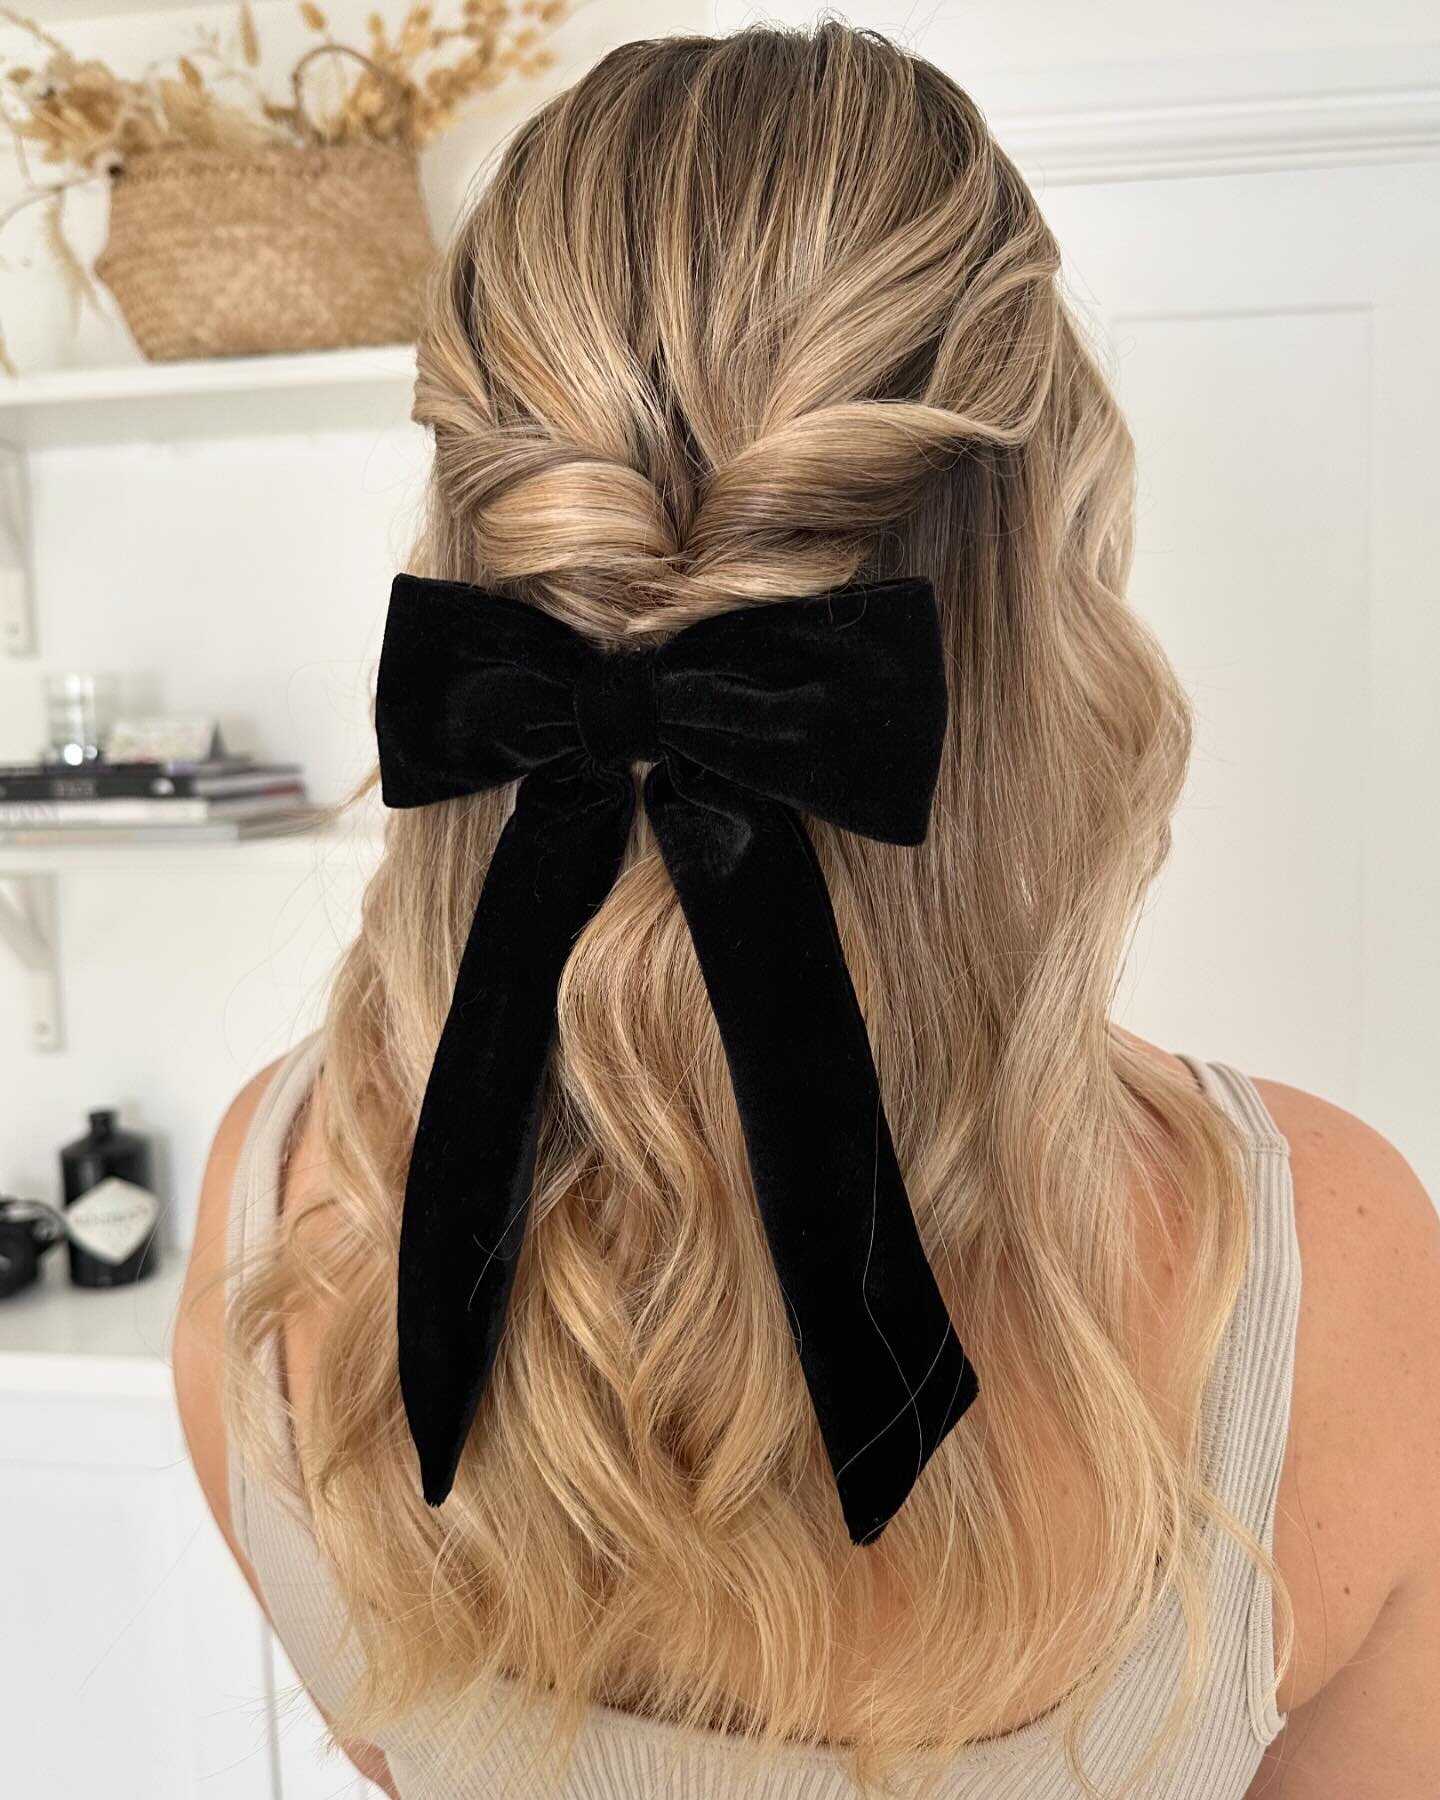 ✨CHARLOTTE✨HIT SAVE 🙌🏻 For Your Half Up Inspiration 🫶🏻

The bow is from @hm perfect for a hen do 👌🏻tag + share with your bride tribe 🙌🏻

For bridal hair and makeup bookings in Essex &amp; London please follow the contact link in my bio 🙌🏻
-